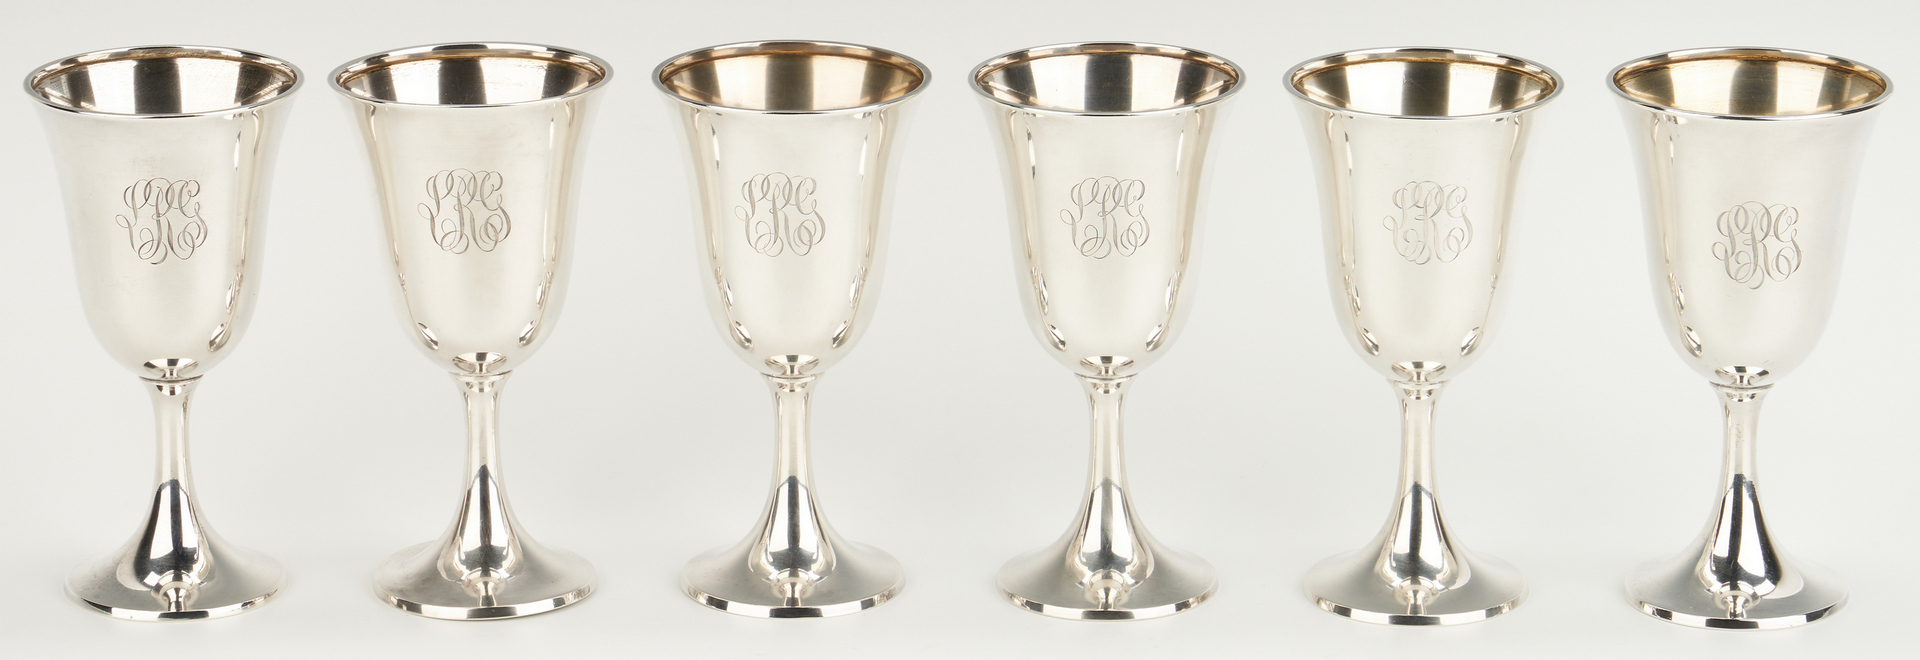 Lot 235: 12 Wallace Sterling Silver Goblets